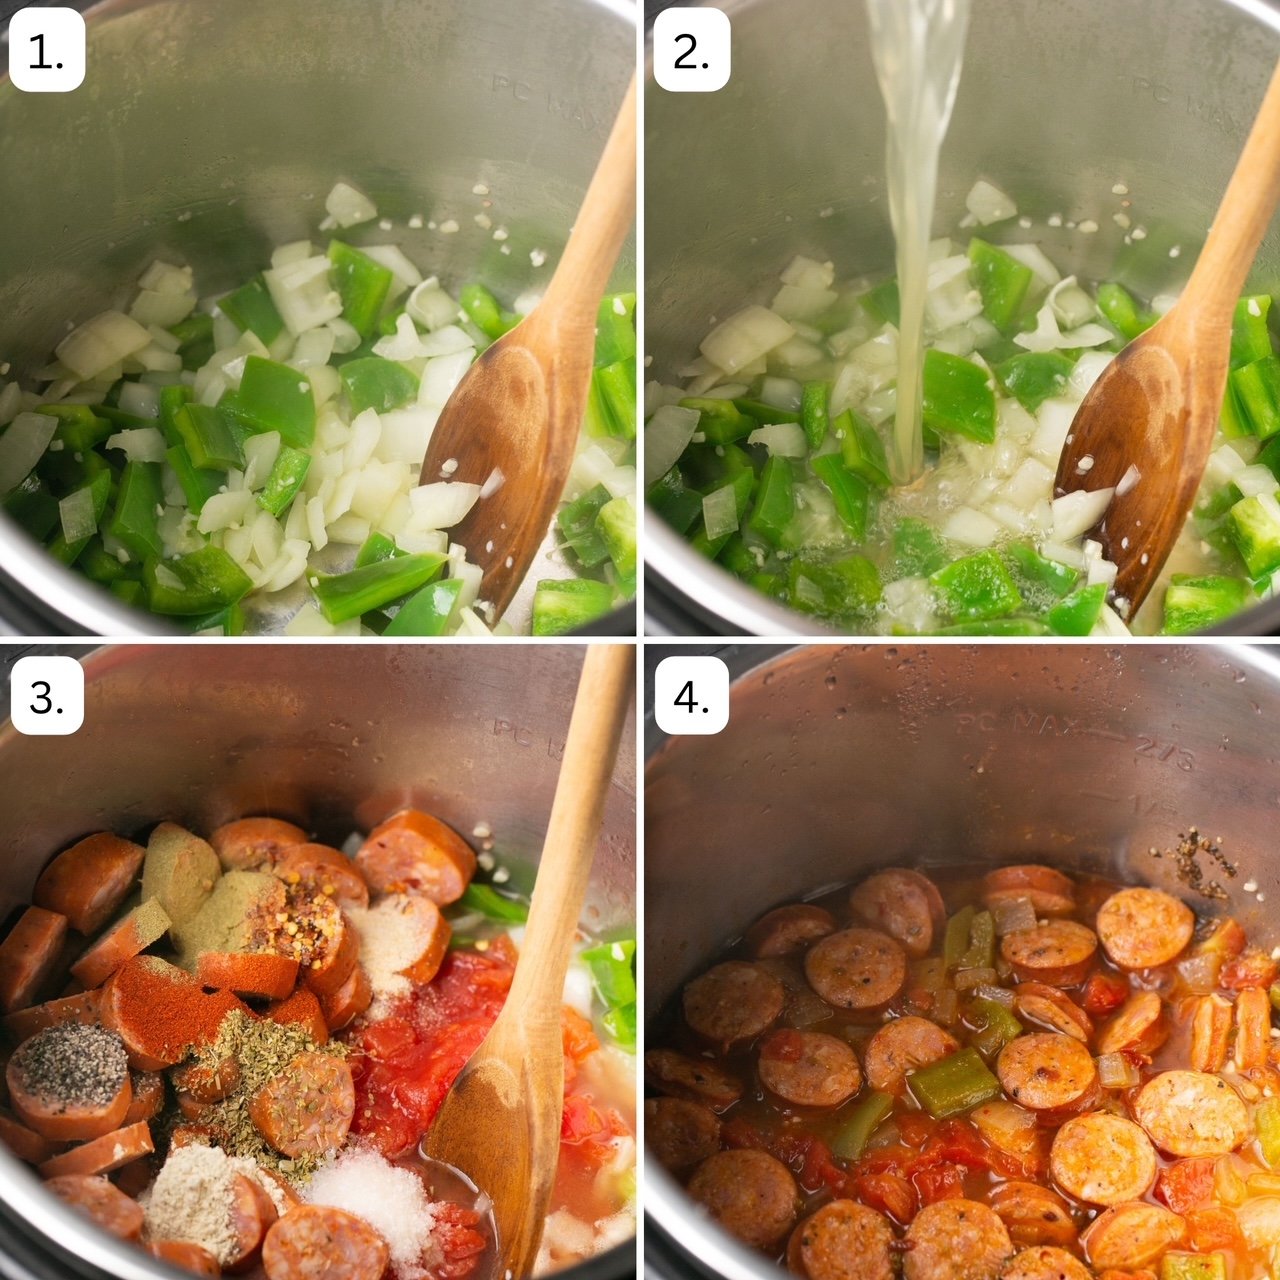 numbered step by step photos showing how to make instant pot jambalaya